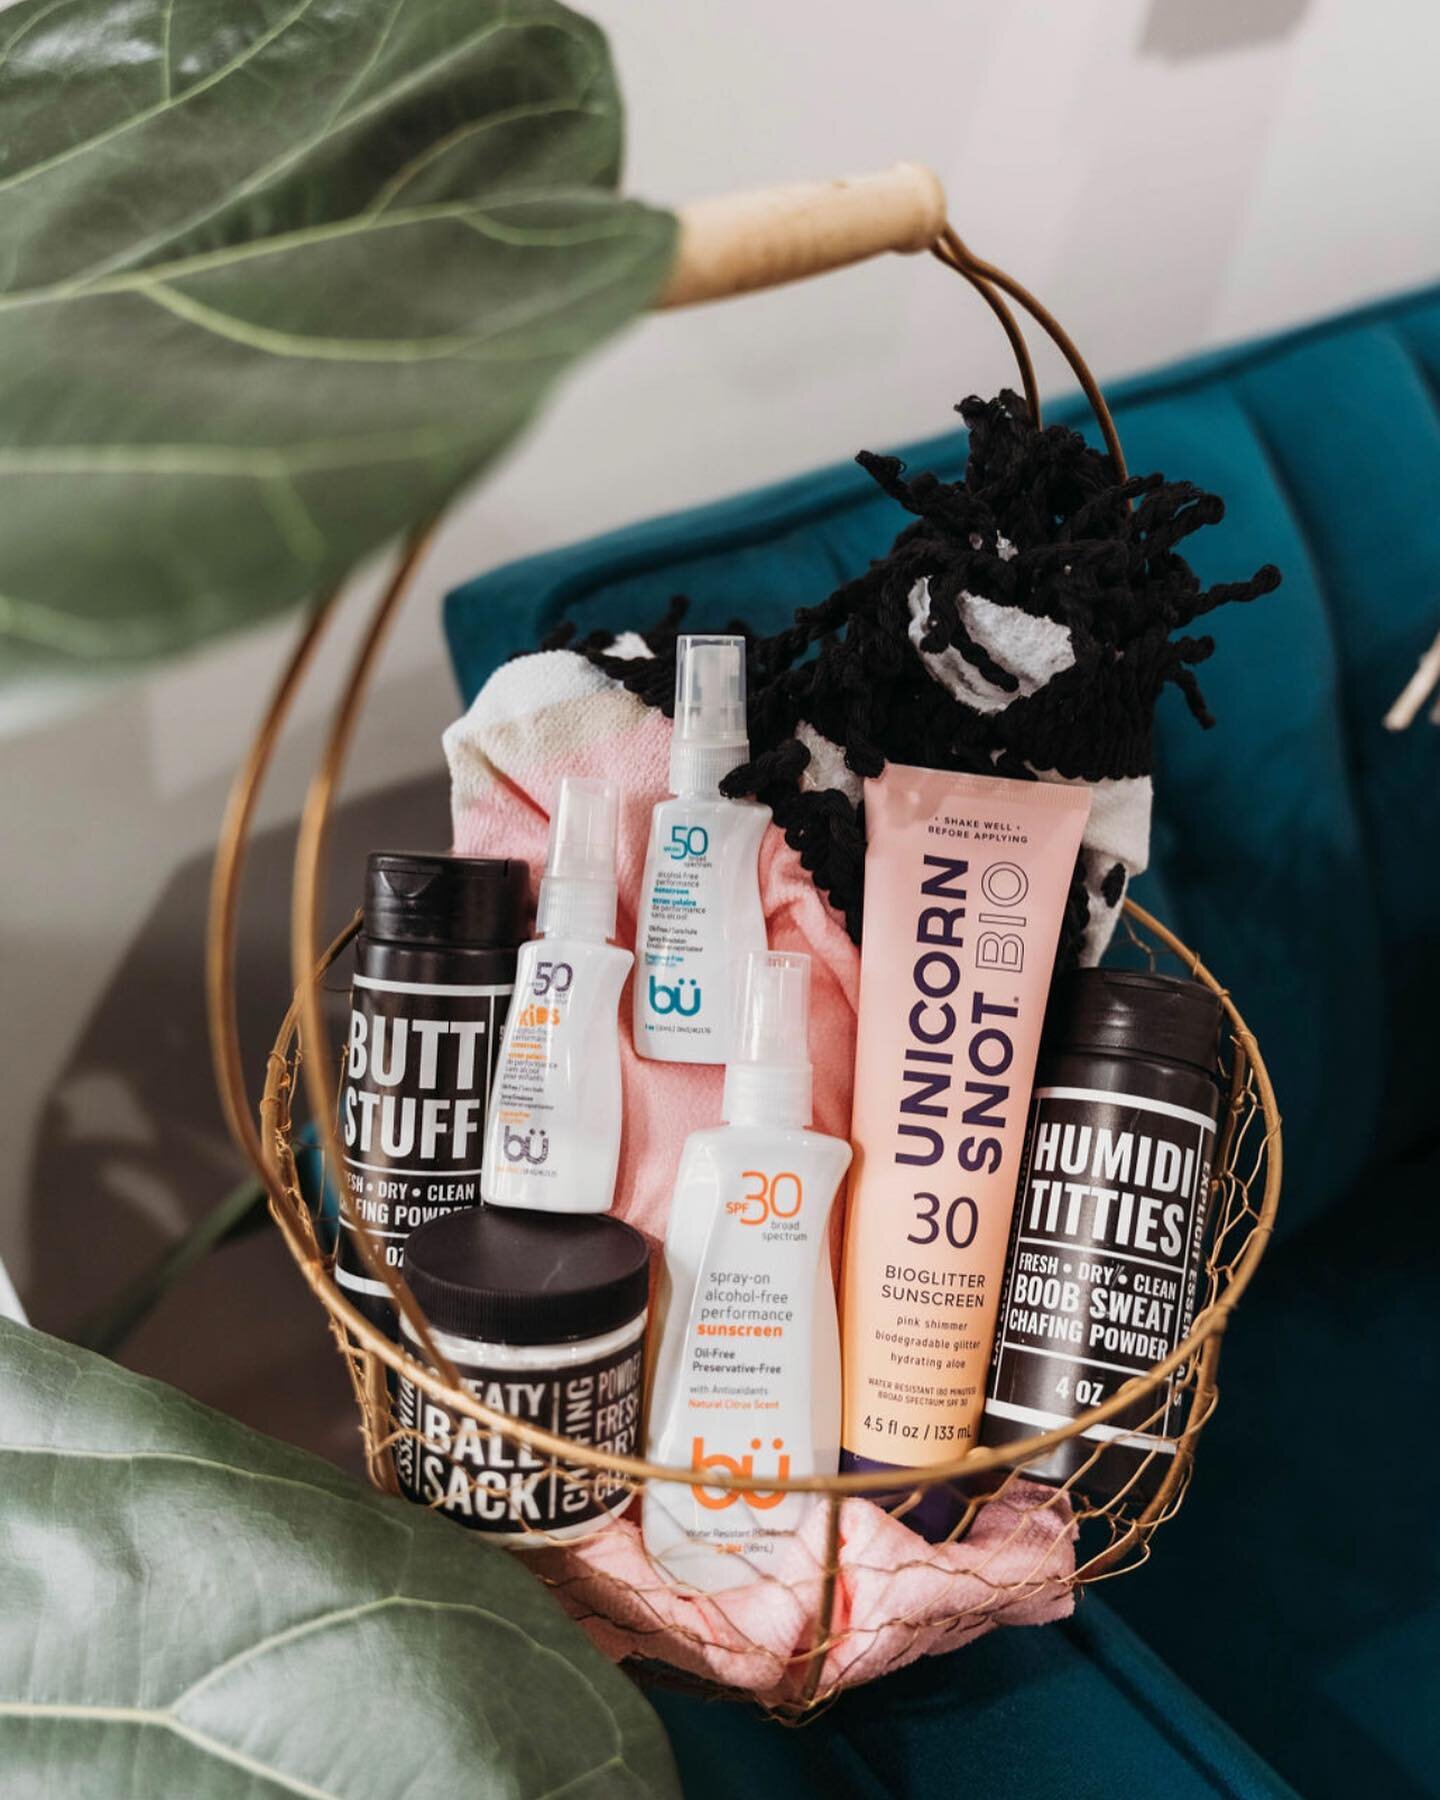 Need a Mother&rsquo;s Day gift?! We have something for every mom in your life 💝!! Stop by and we can help you find that perfect gift 🛍️!!! 4 days until Mother&rsquo;s Day!!! 
.
Photo by @hey.its.me.amber 
.
.
#wedding #Earthlybeauty #earthlybeautyb